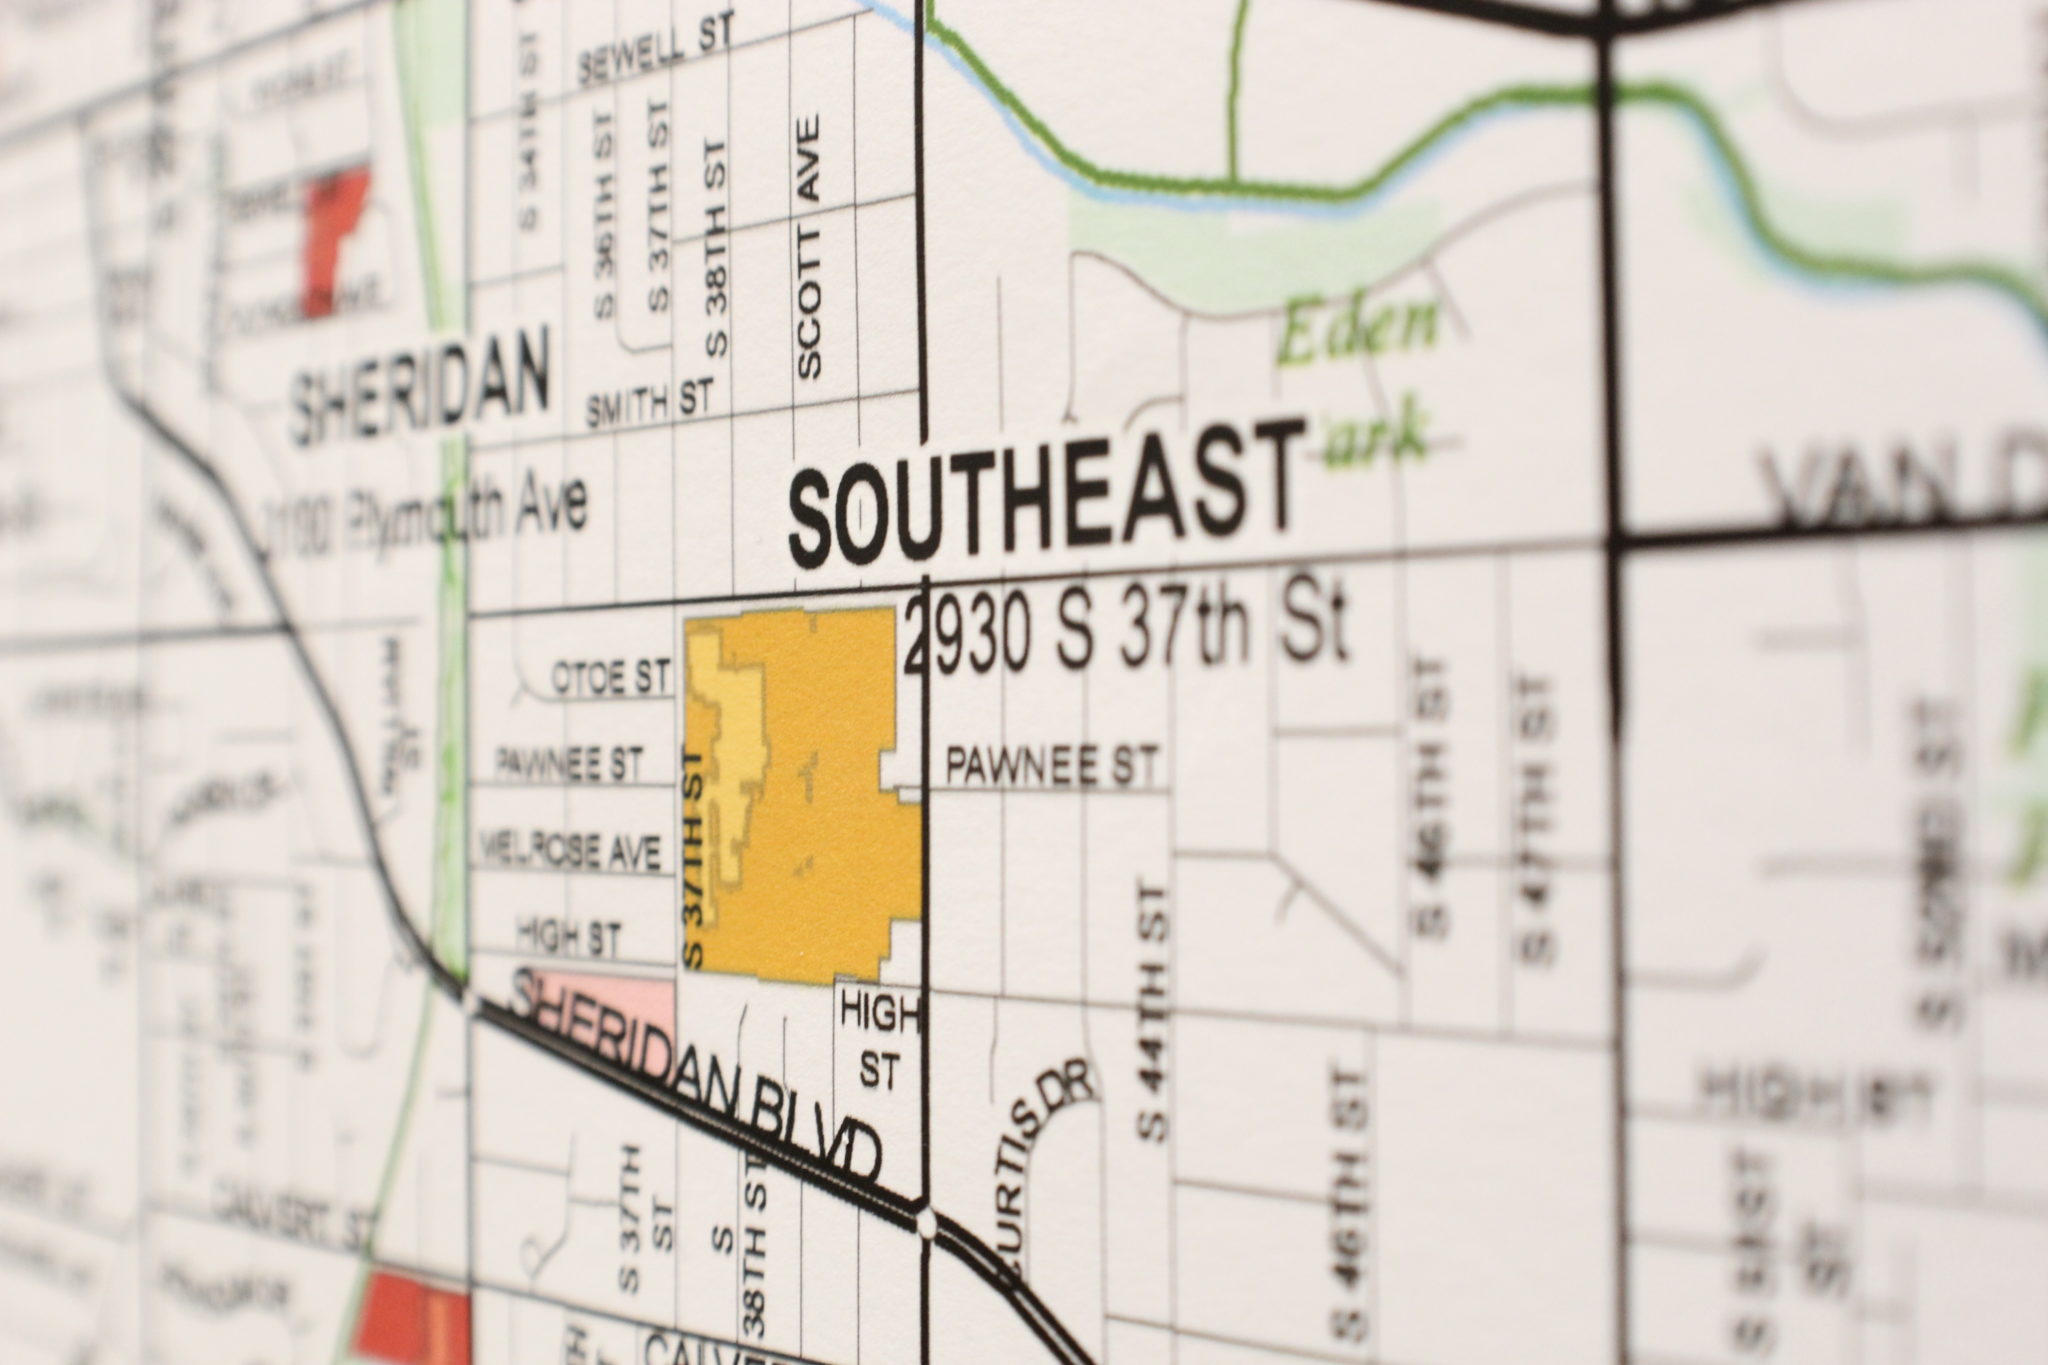 Photo of a map showing southeast high school